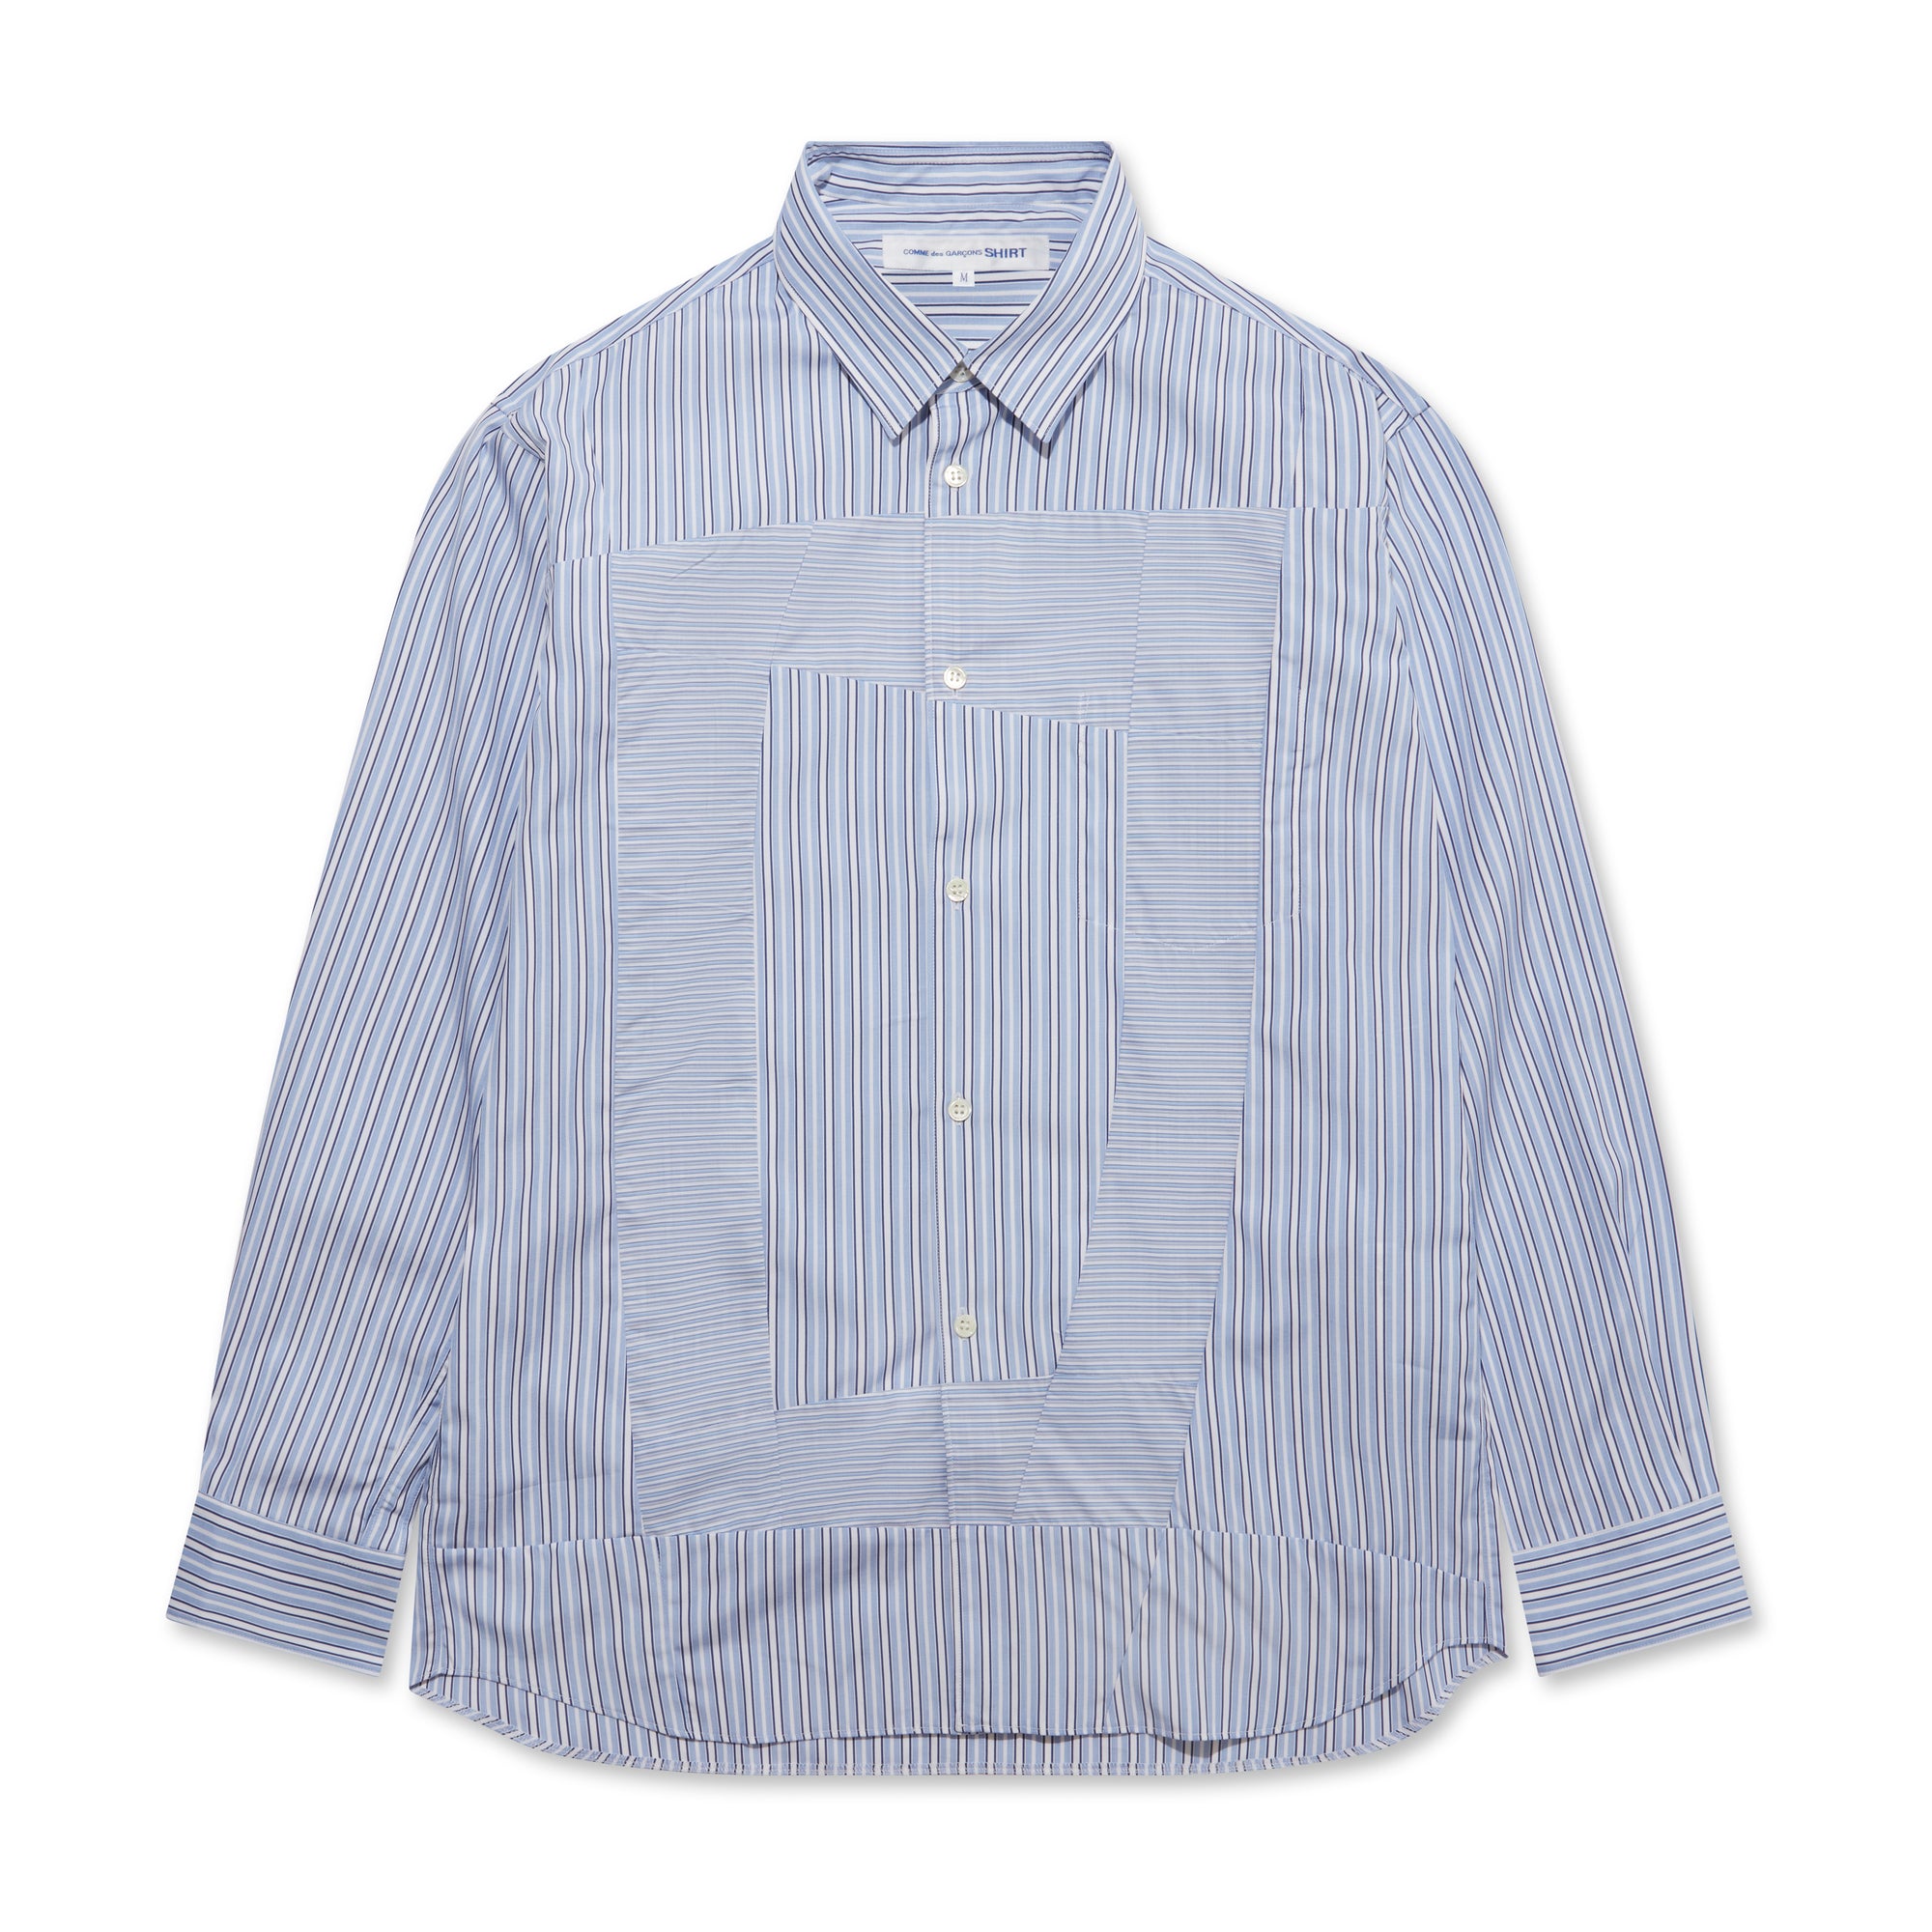 CDG Shirt Forever - Classic Fit Square Patchwork Stripe Shirt - (Stripe/Mix) view 1